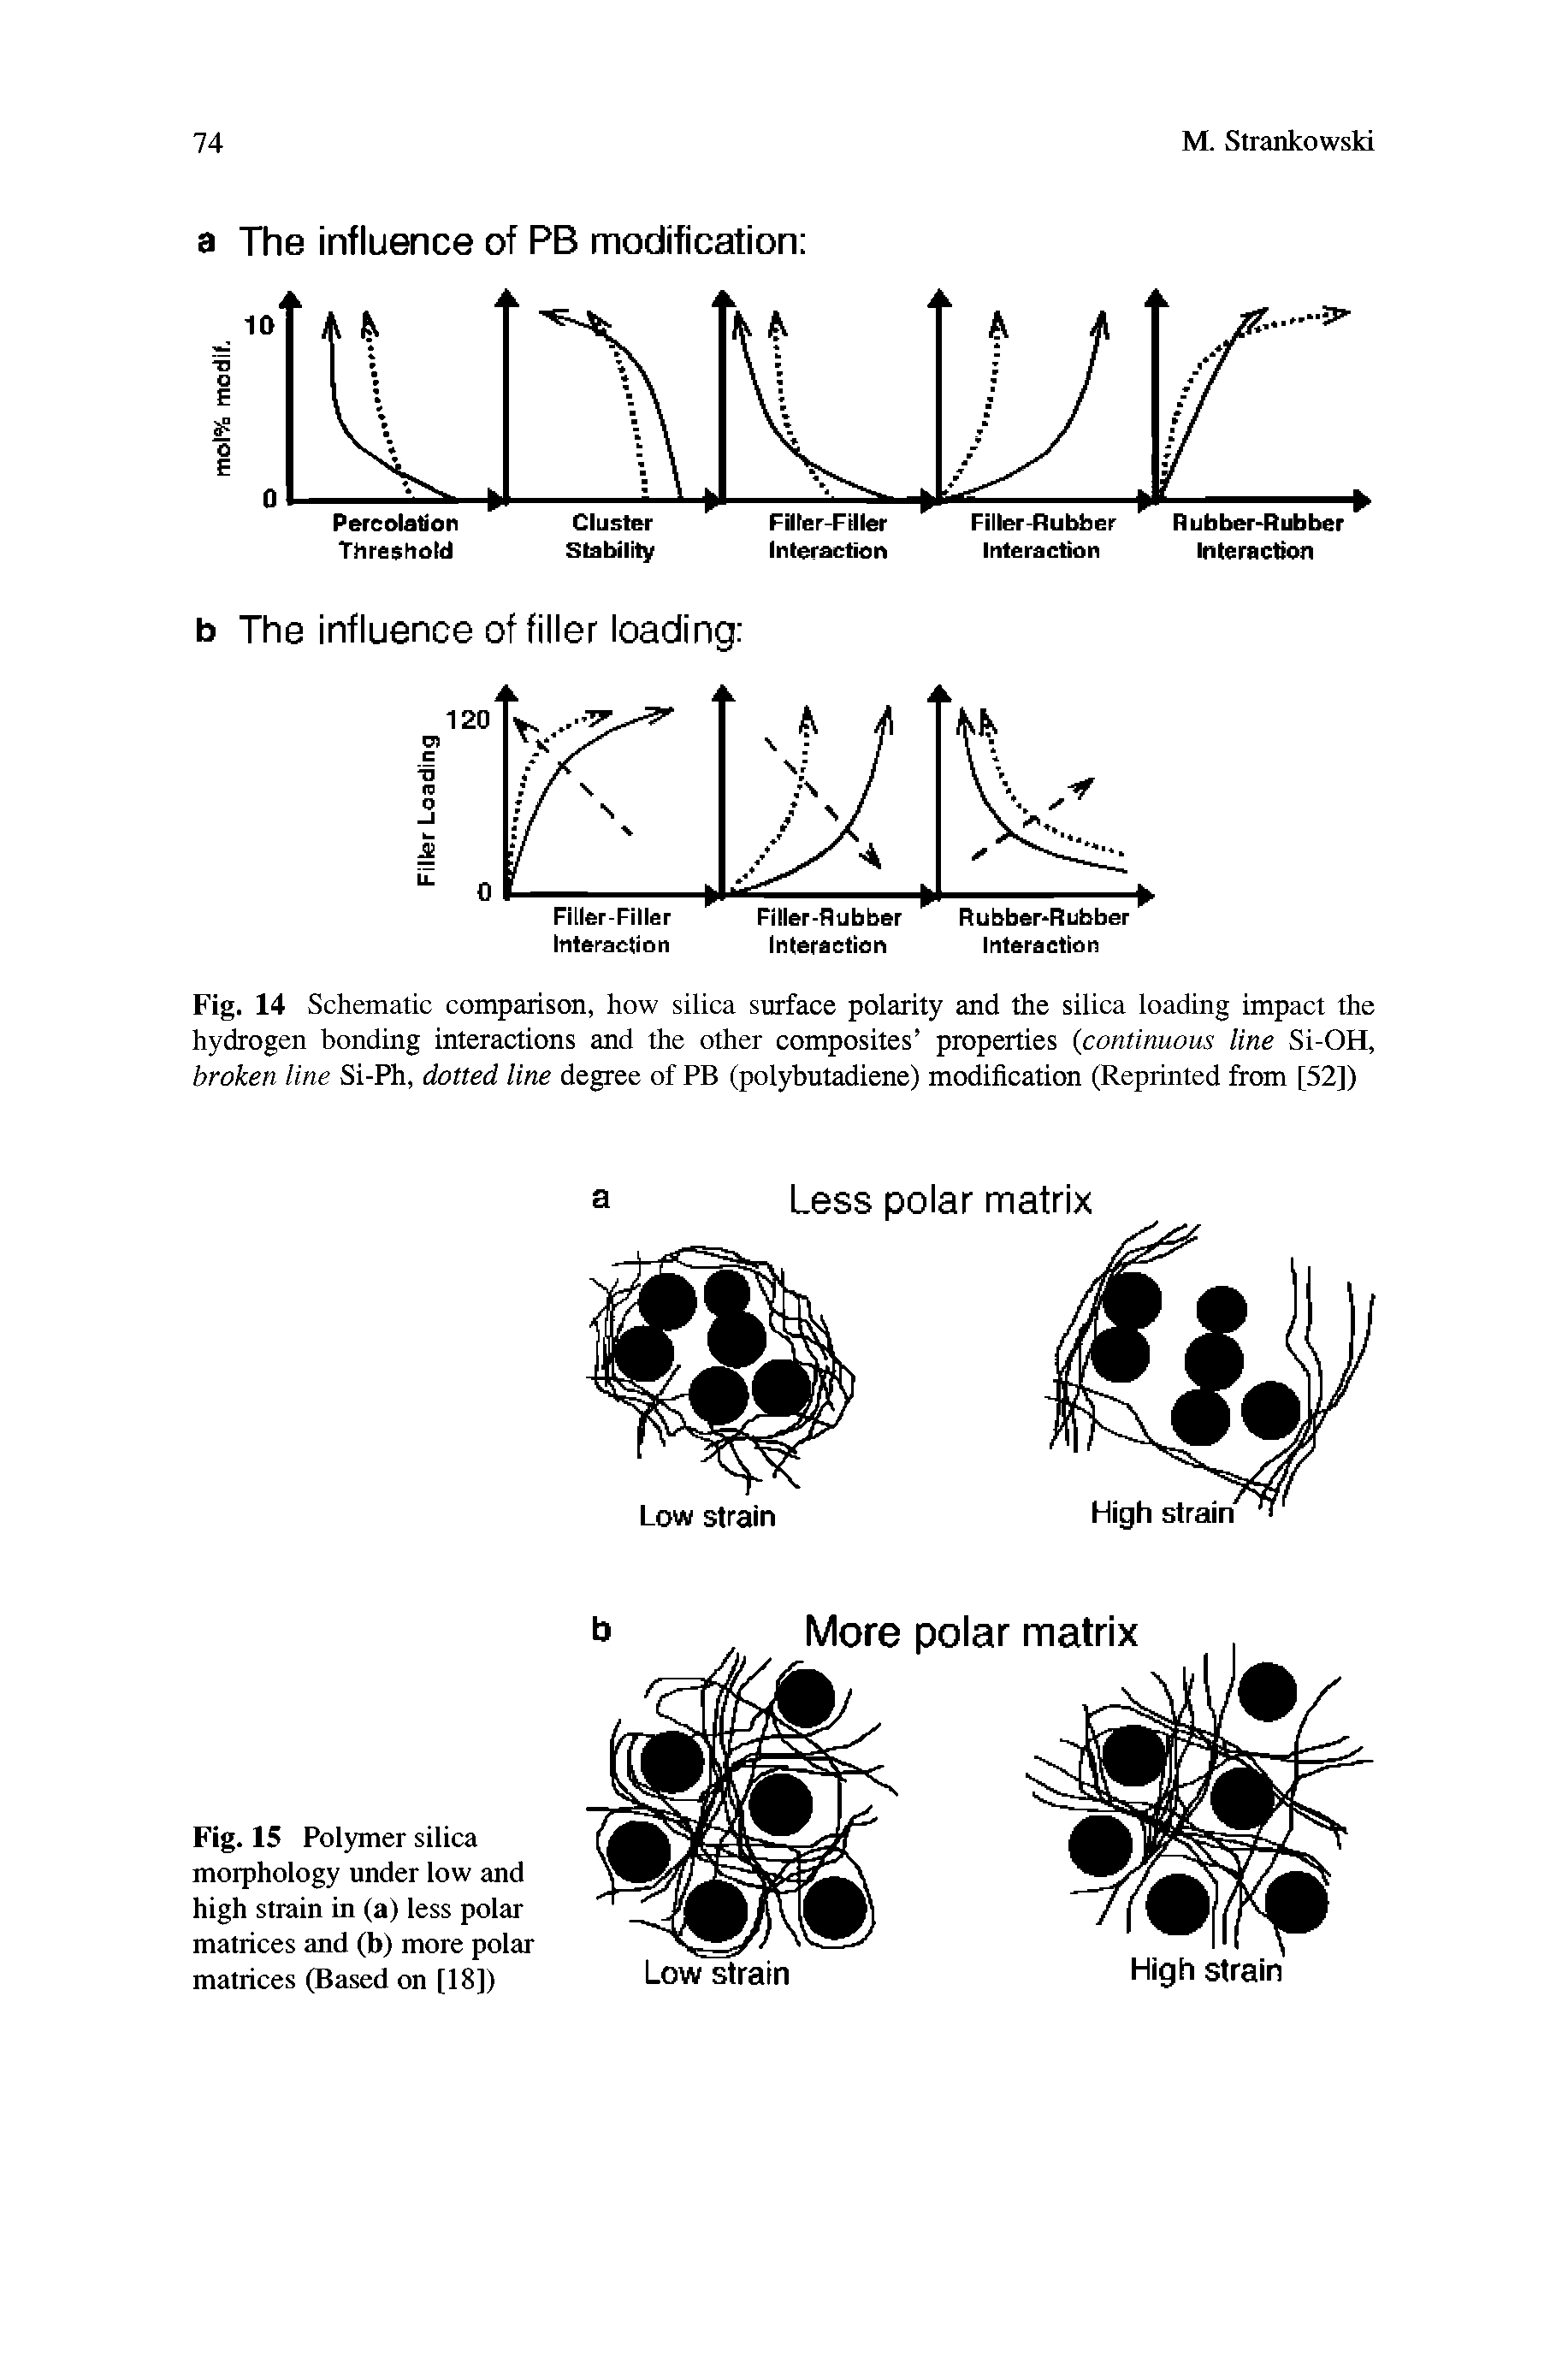 Fig. 14 Schematic comparison, how silica surface polarity and the silica loading impact the hydrogen bonding interactions and the other composites properties (continuous line Si-OH, broken line Si-Ph, dotted line degree of PB (polybutadiene) modification (Reprinted from [52])...